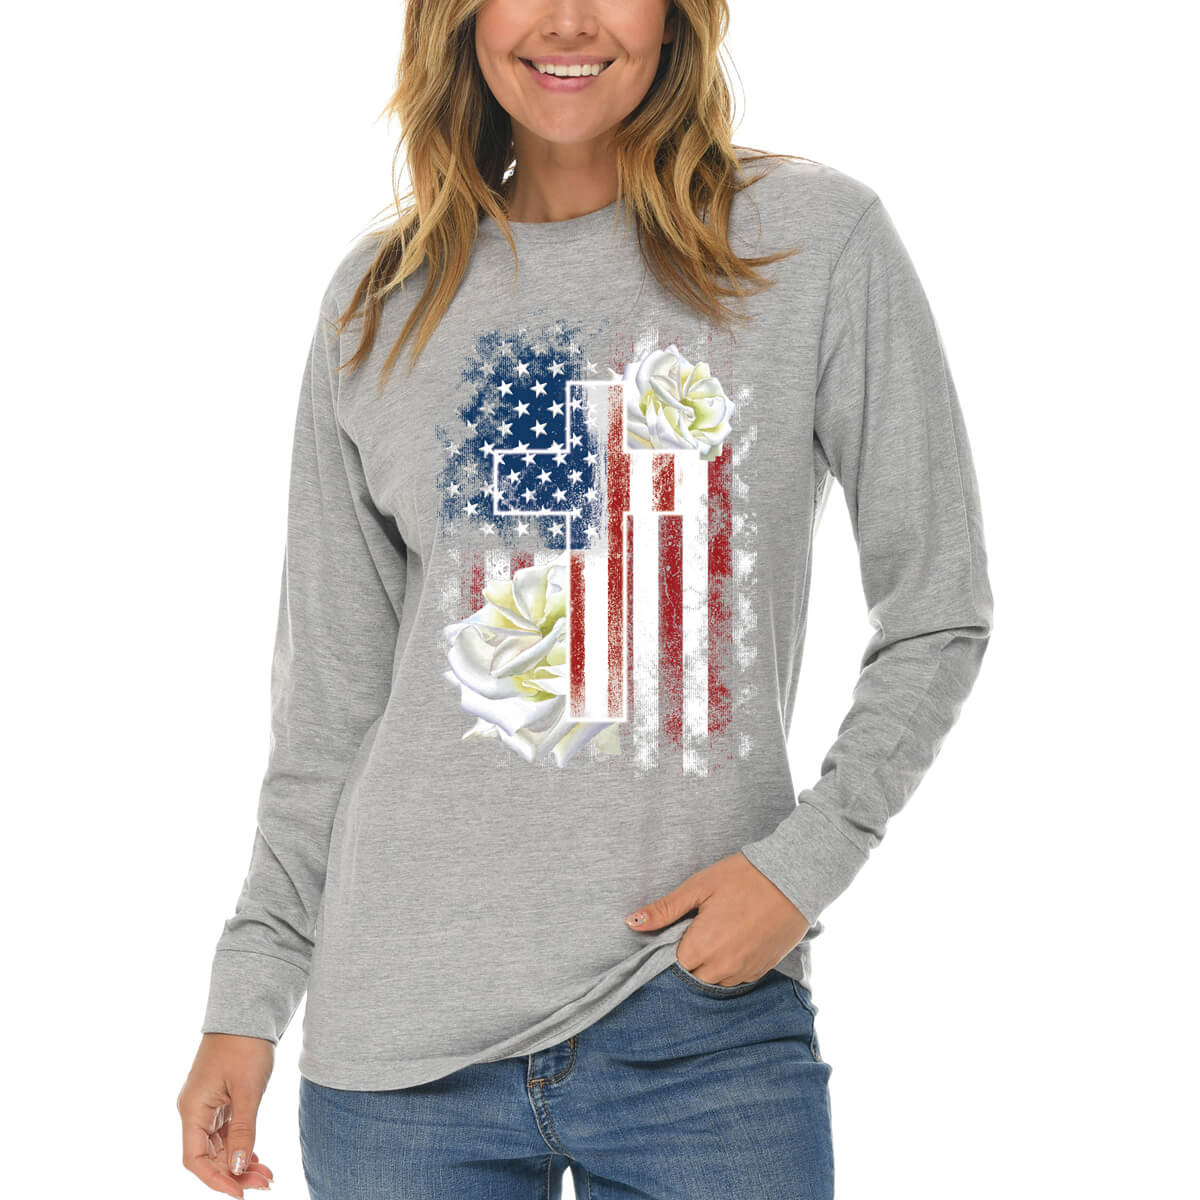 American Flag Cross With Roses Long Sleeve T Shirt